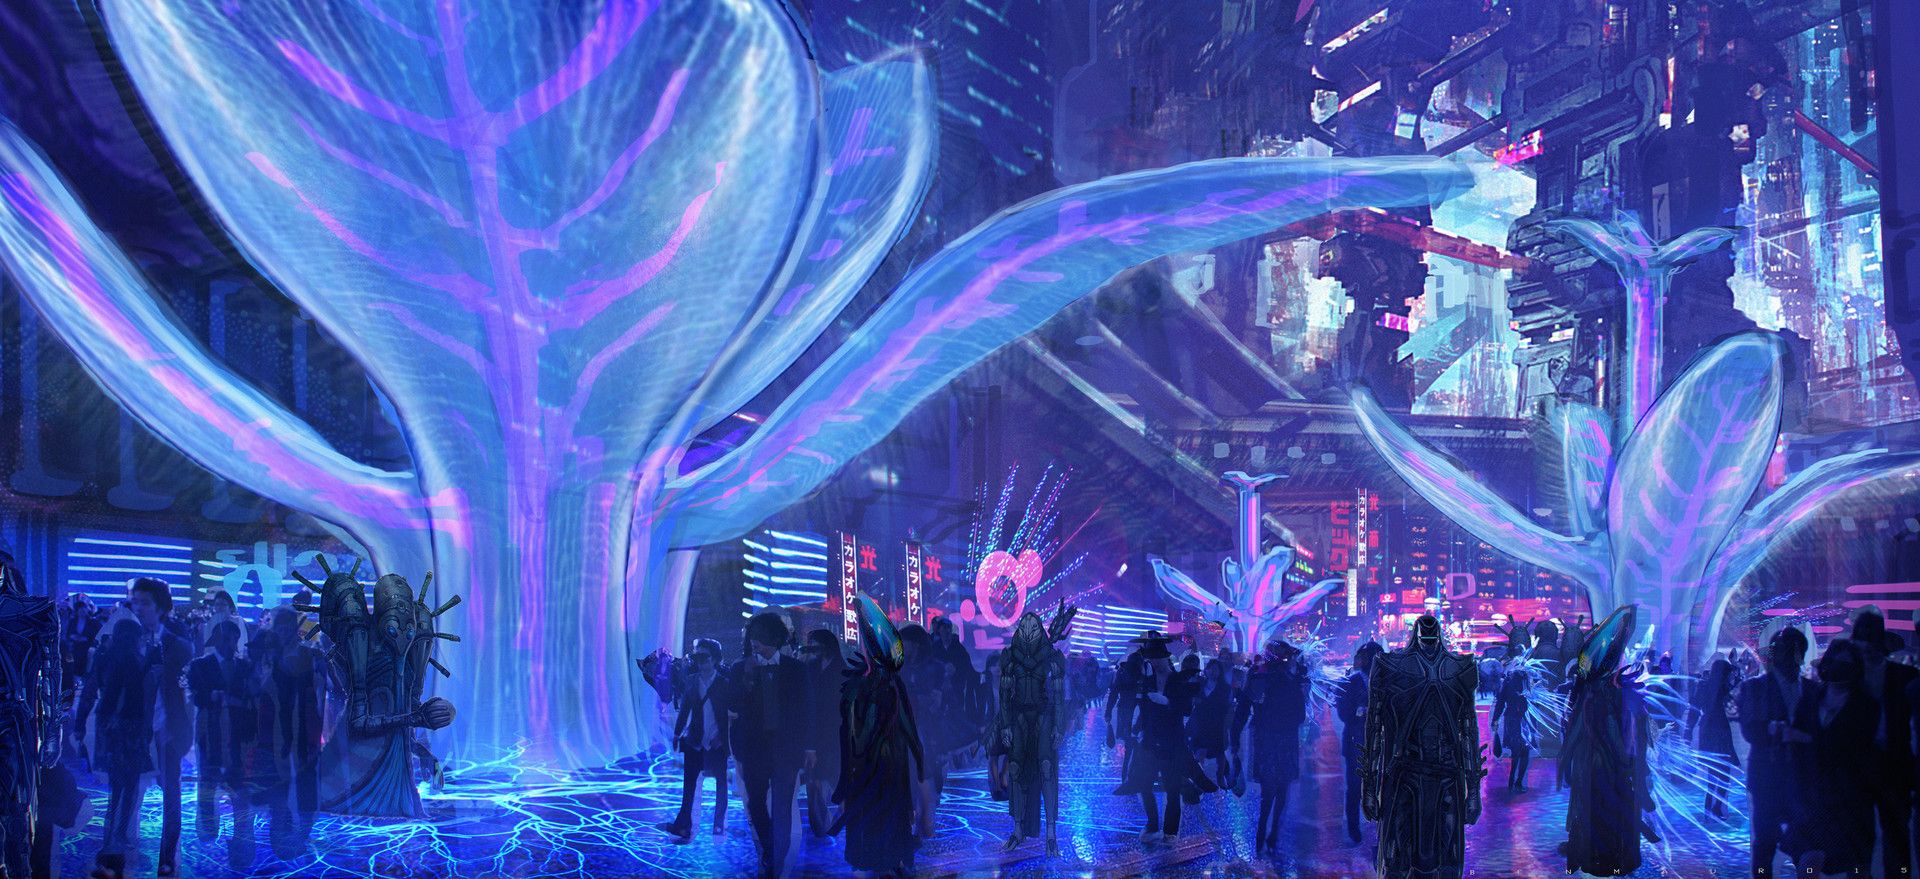 Wallpaper, 1920x879 px, aliens, Ben Mauro, Big Market, concept cars, crowds, plants, science fiction, Valerian and the City of a Thousand Planets 1920x879